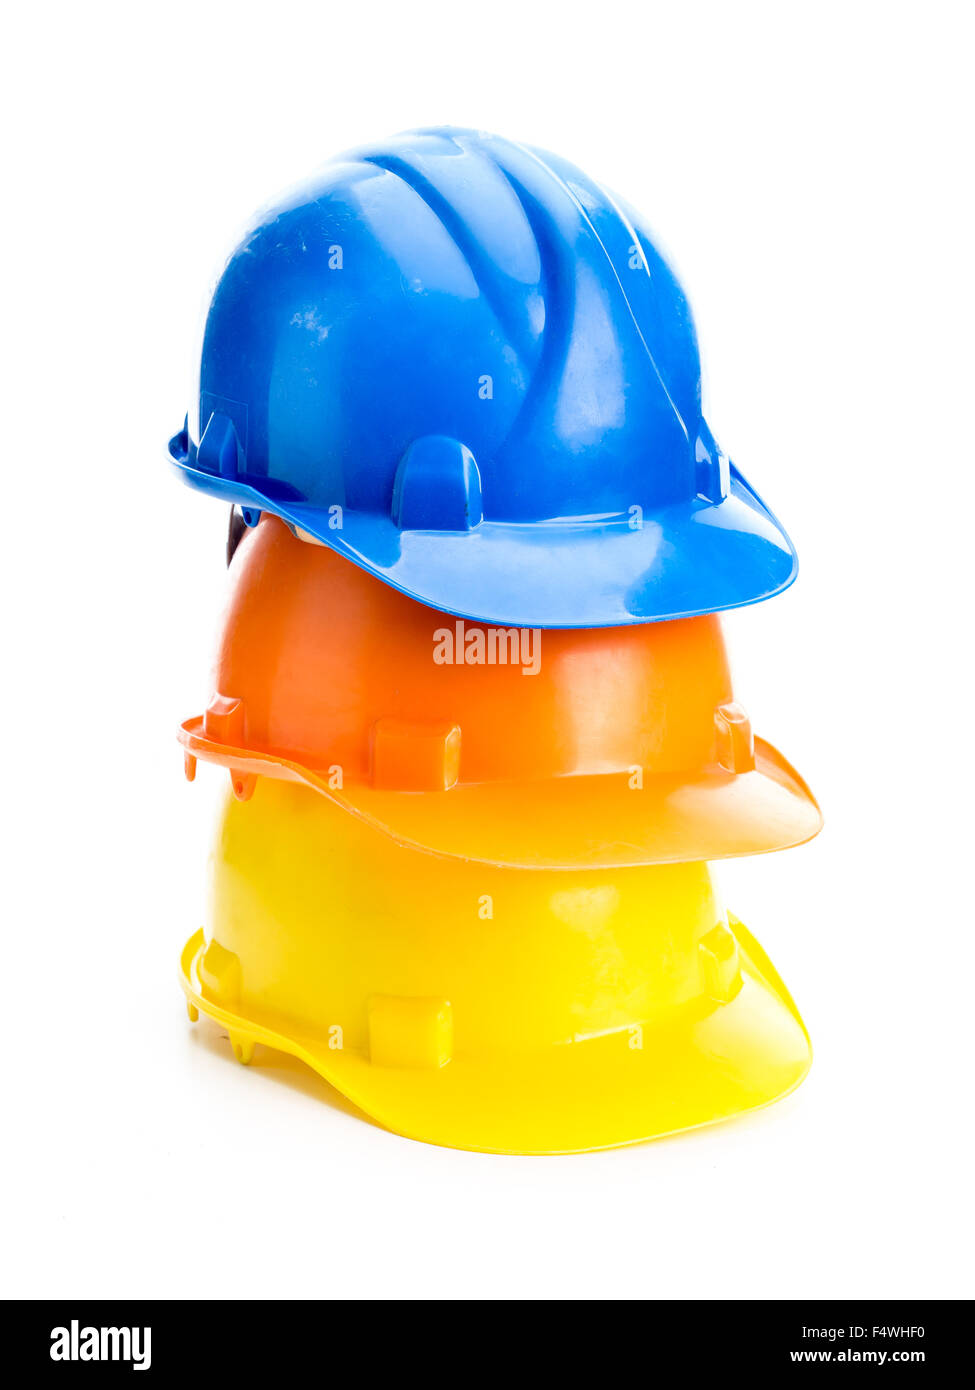 Three hard hats in blue, orange and yellow colors piled up shot on white background Stock Photo